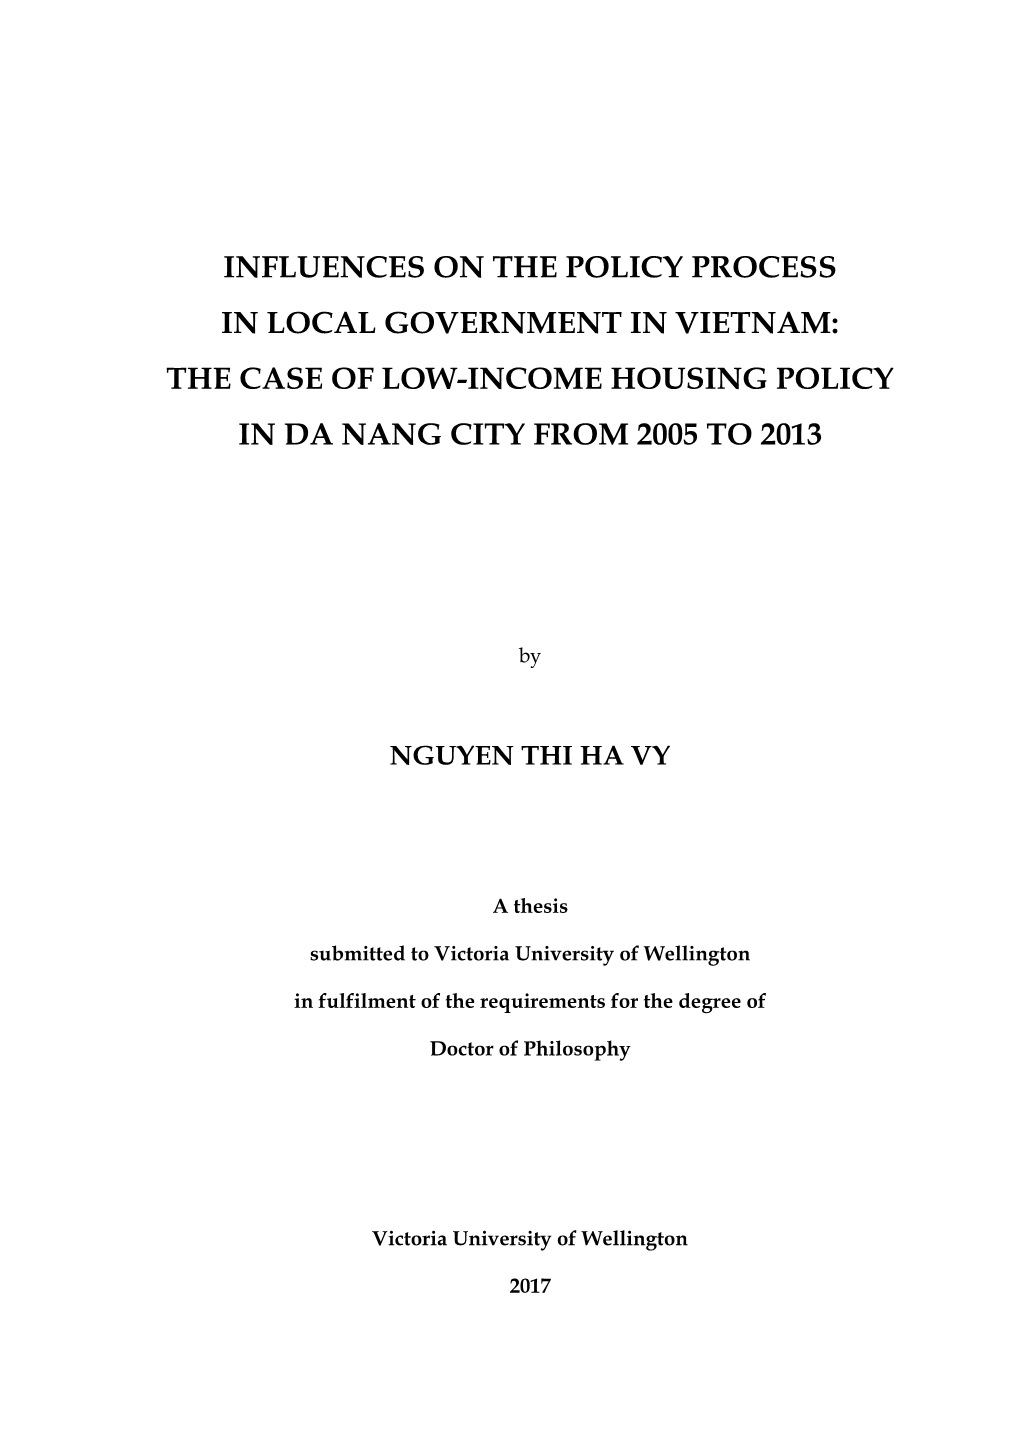 Influences on the Policy Process in Local Government in Vietnam: the Case of Low-Income Housing Policy in Da Nang City from 2005 to 2013